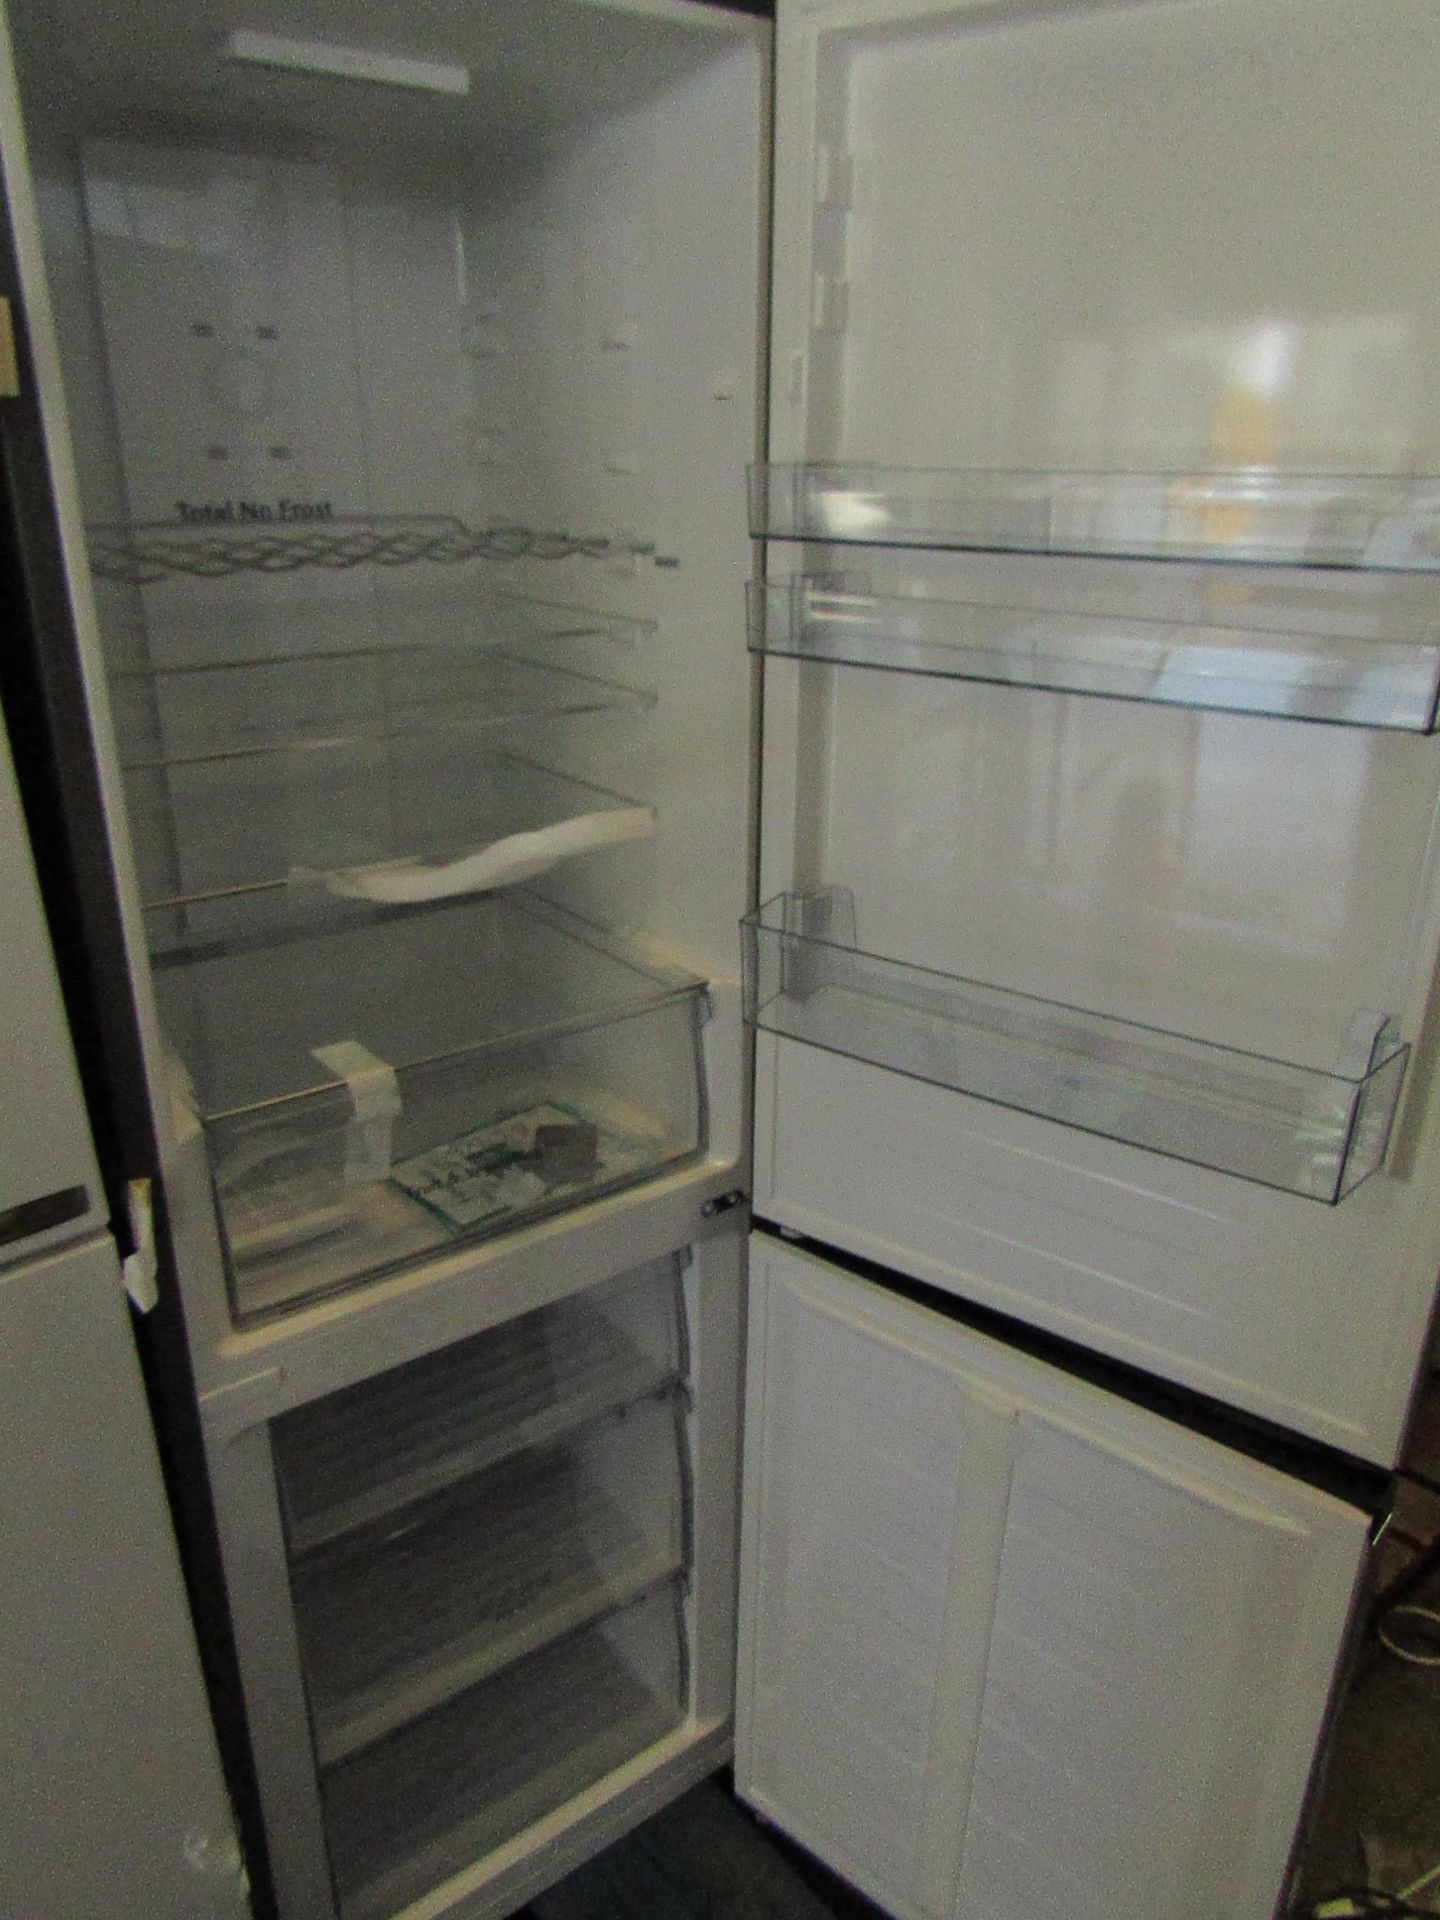 Hisense 60/40 Fridge freezer, tested working for coldness in both parts, looks unused inside but has - Image 2 of 2